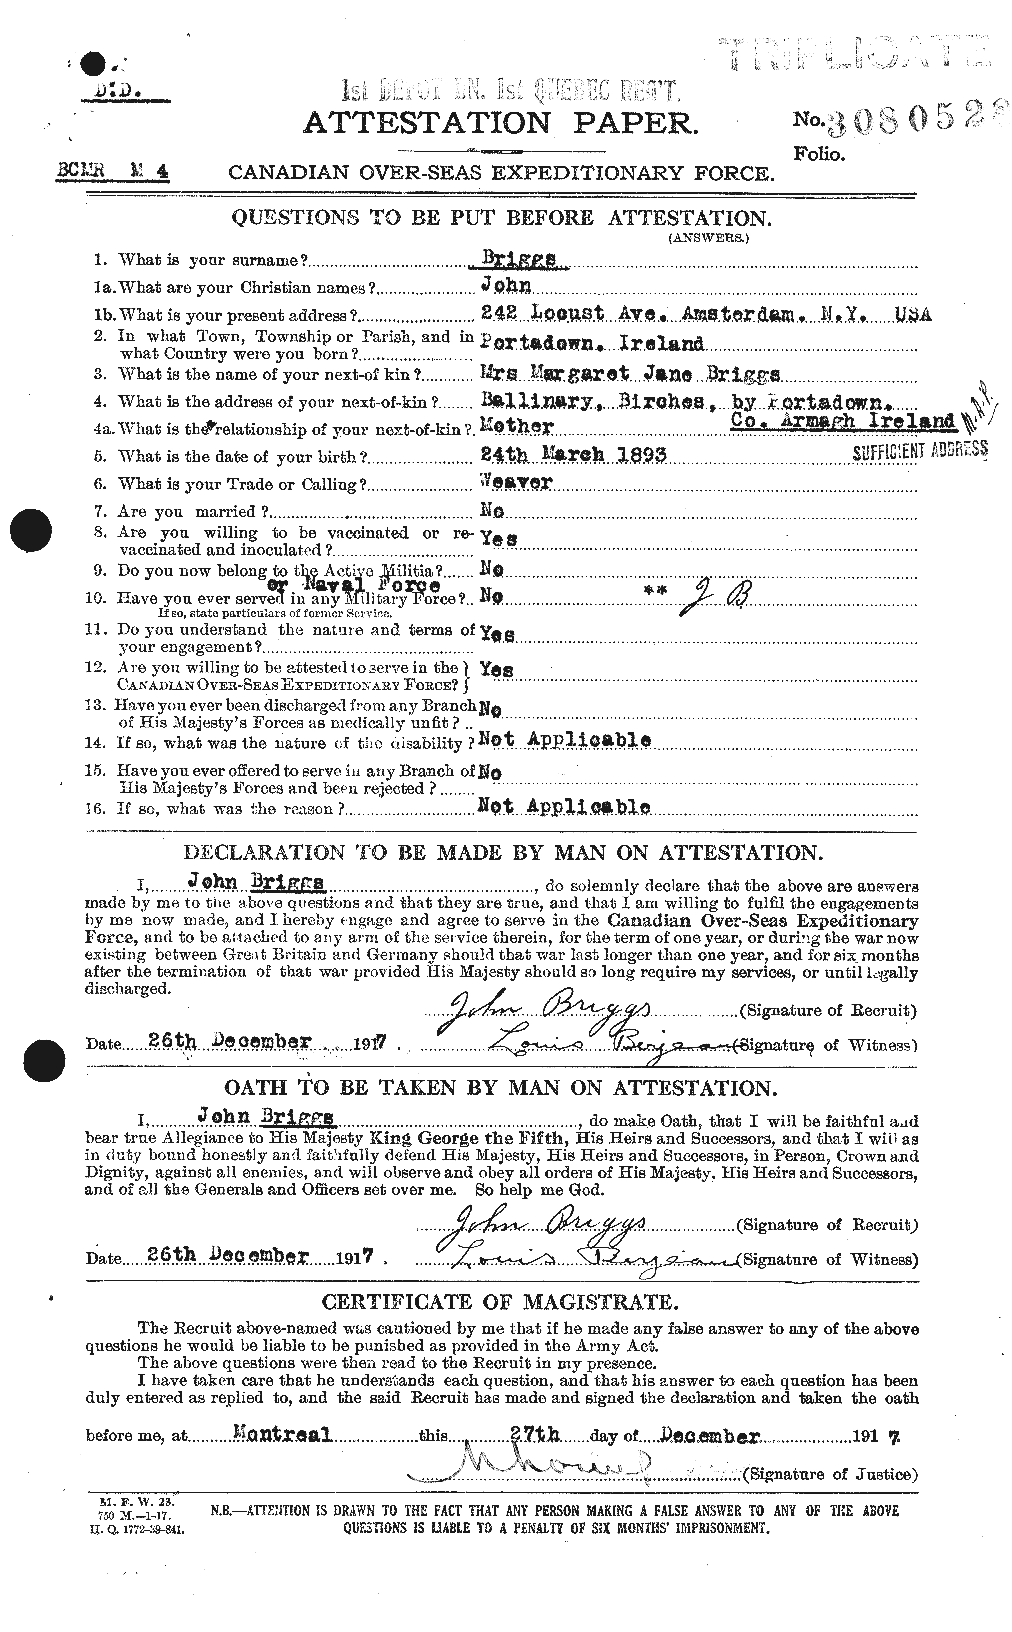 Personnel Records of the First World War - CEF 264050a